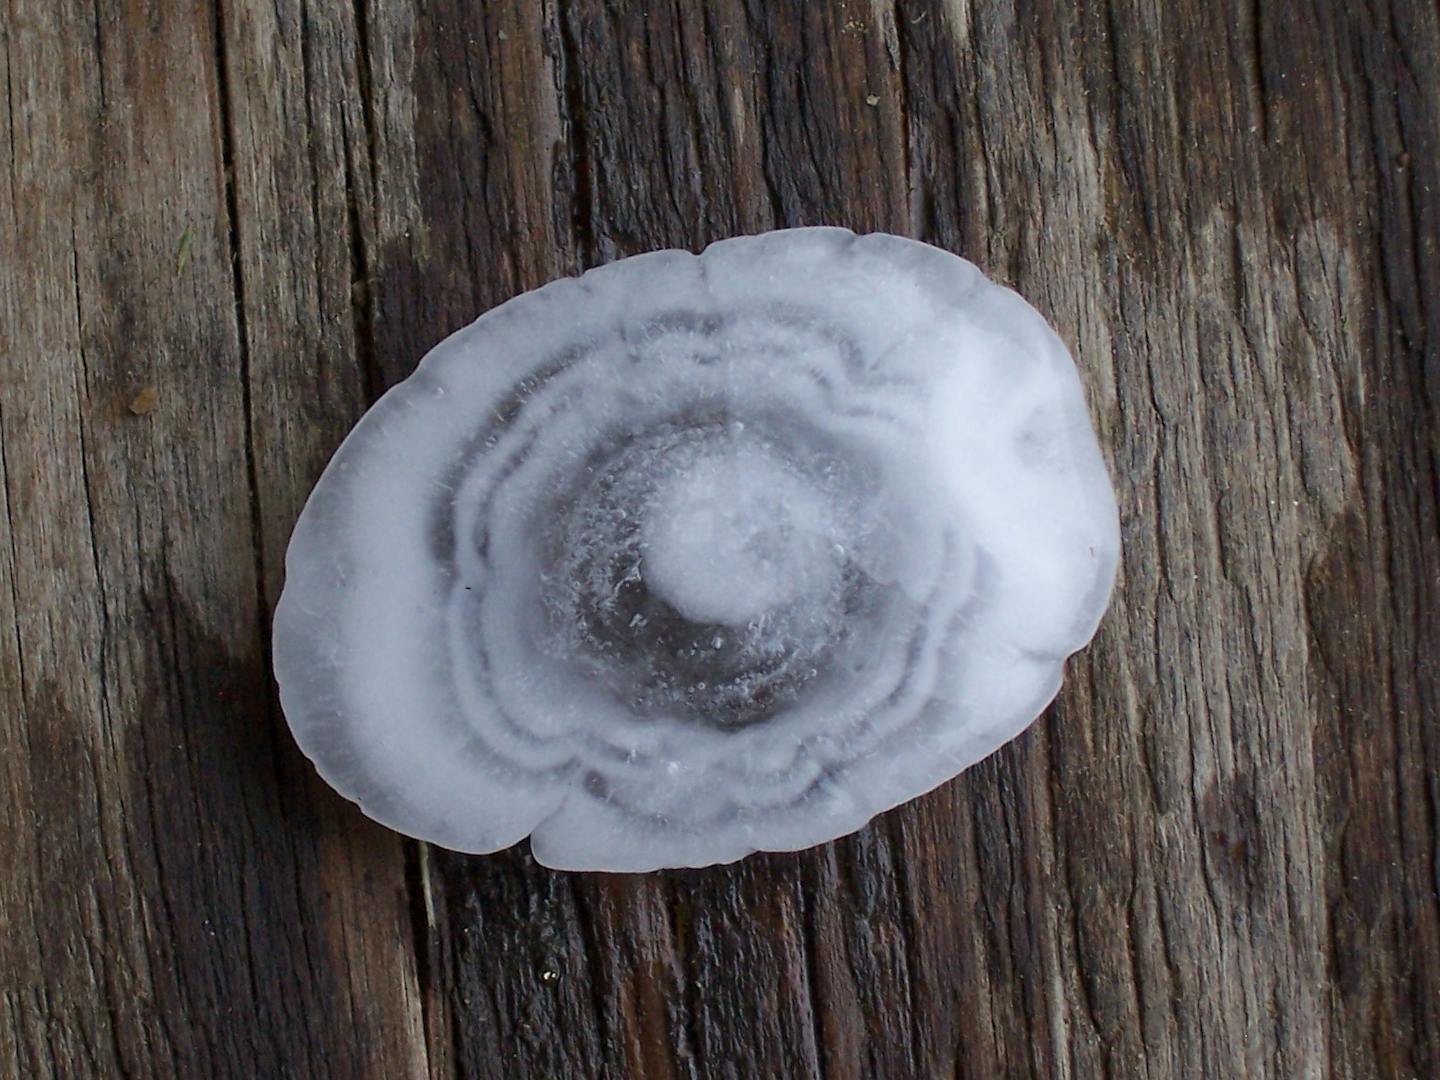 A sliced-open a hailstone lying on a table shows several wavy rings like tree rings